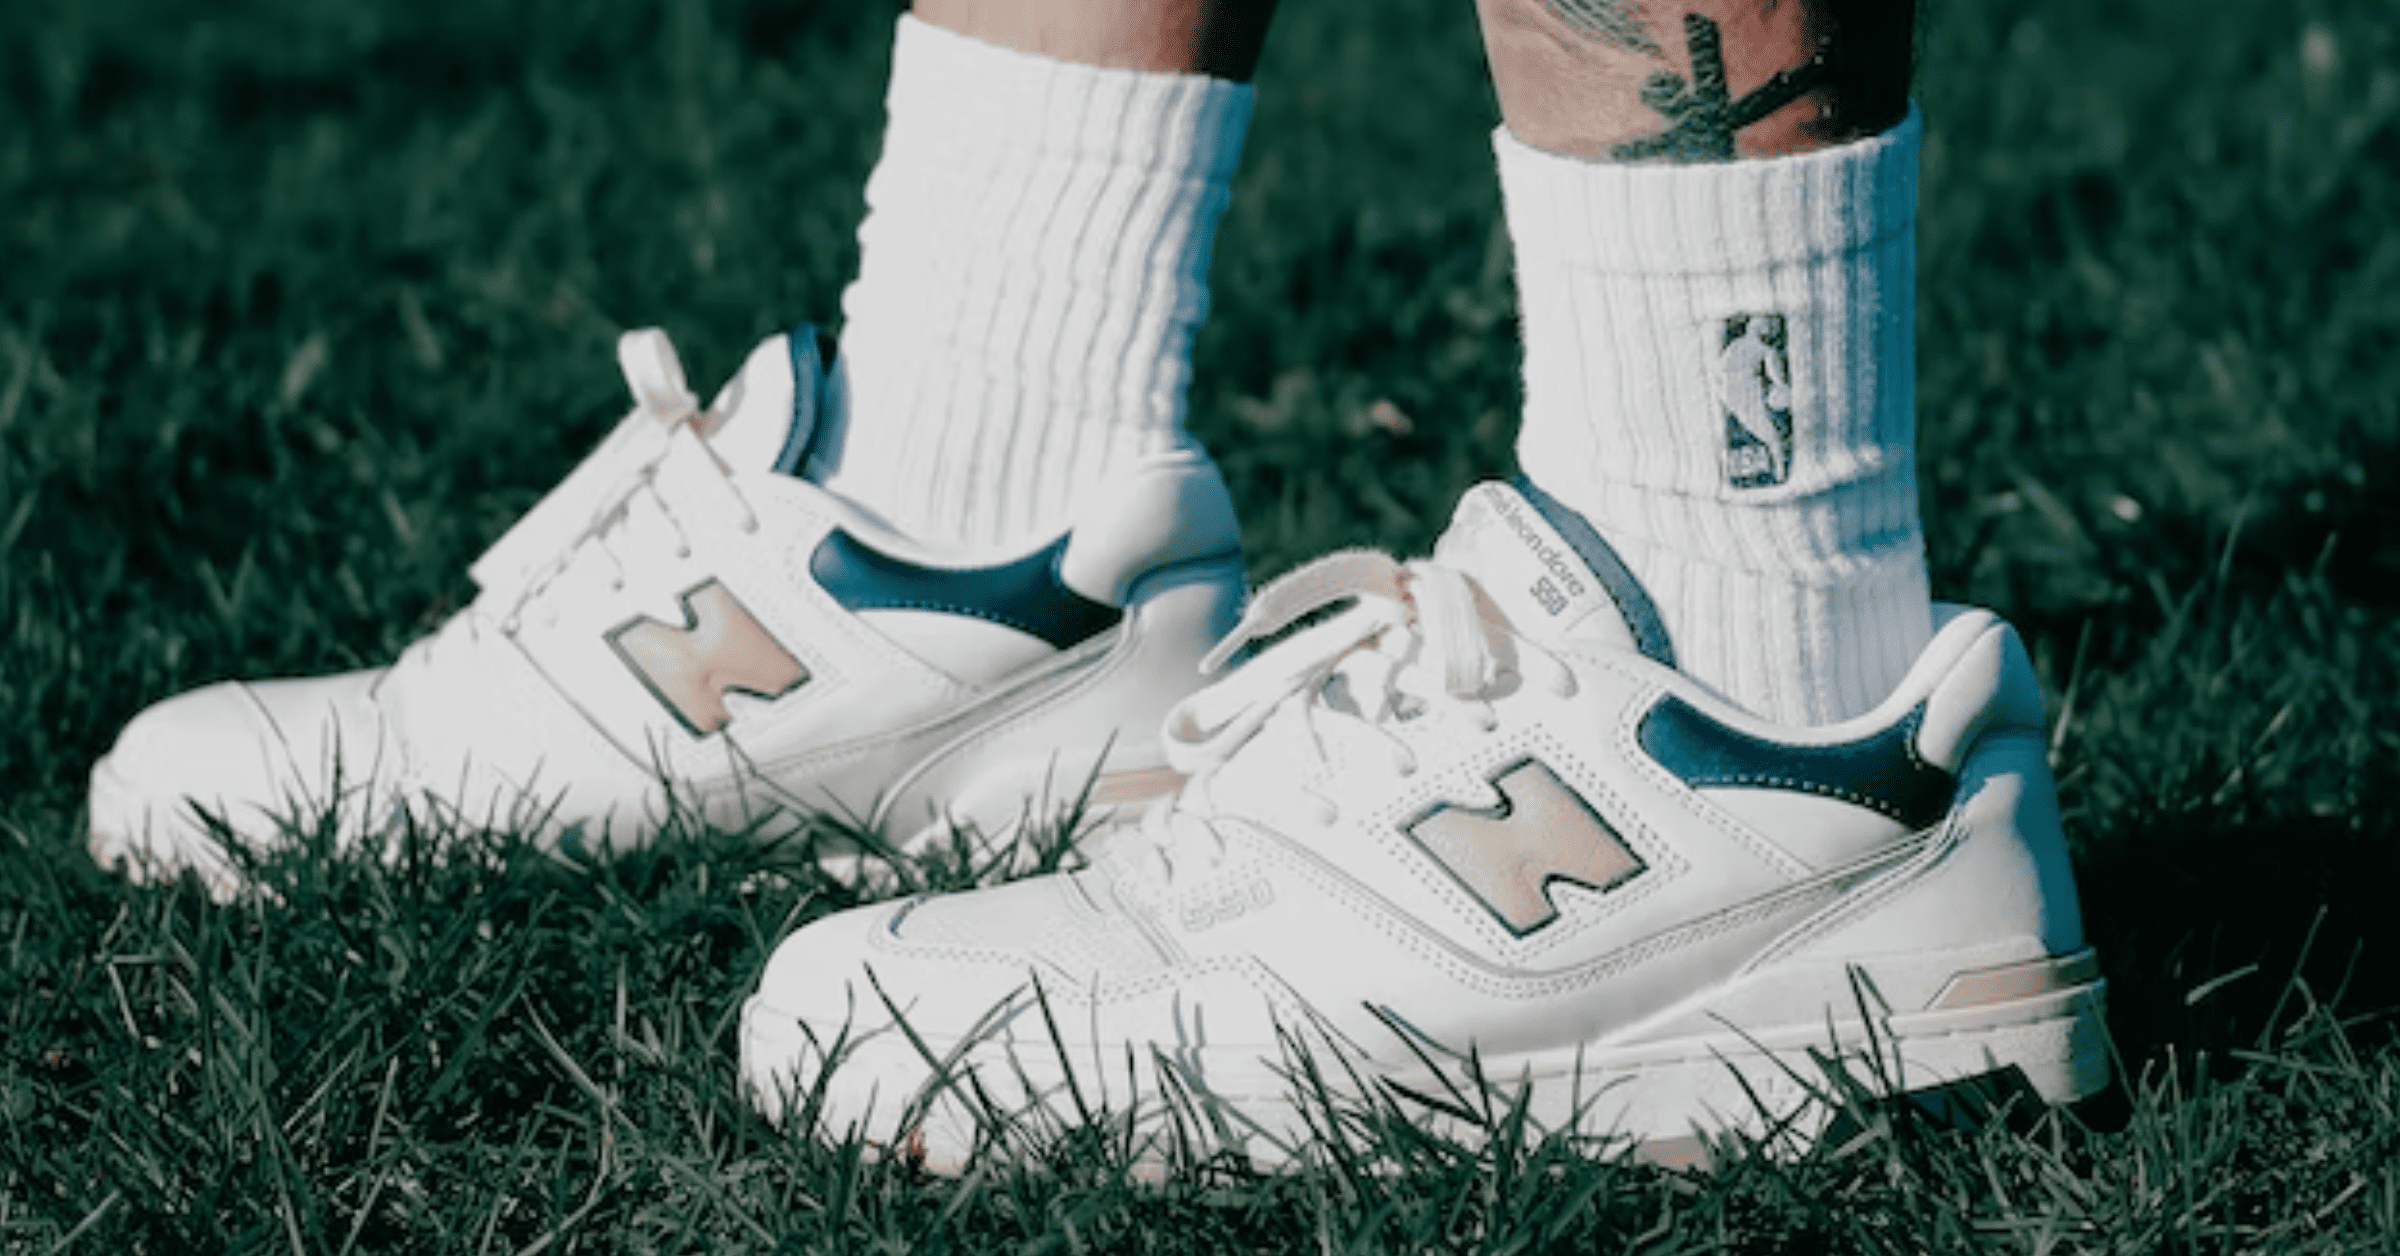 How to Spot Fake New Balance 550 Sneakers